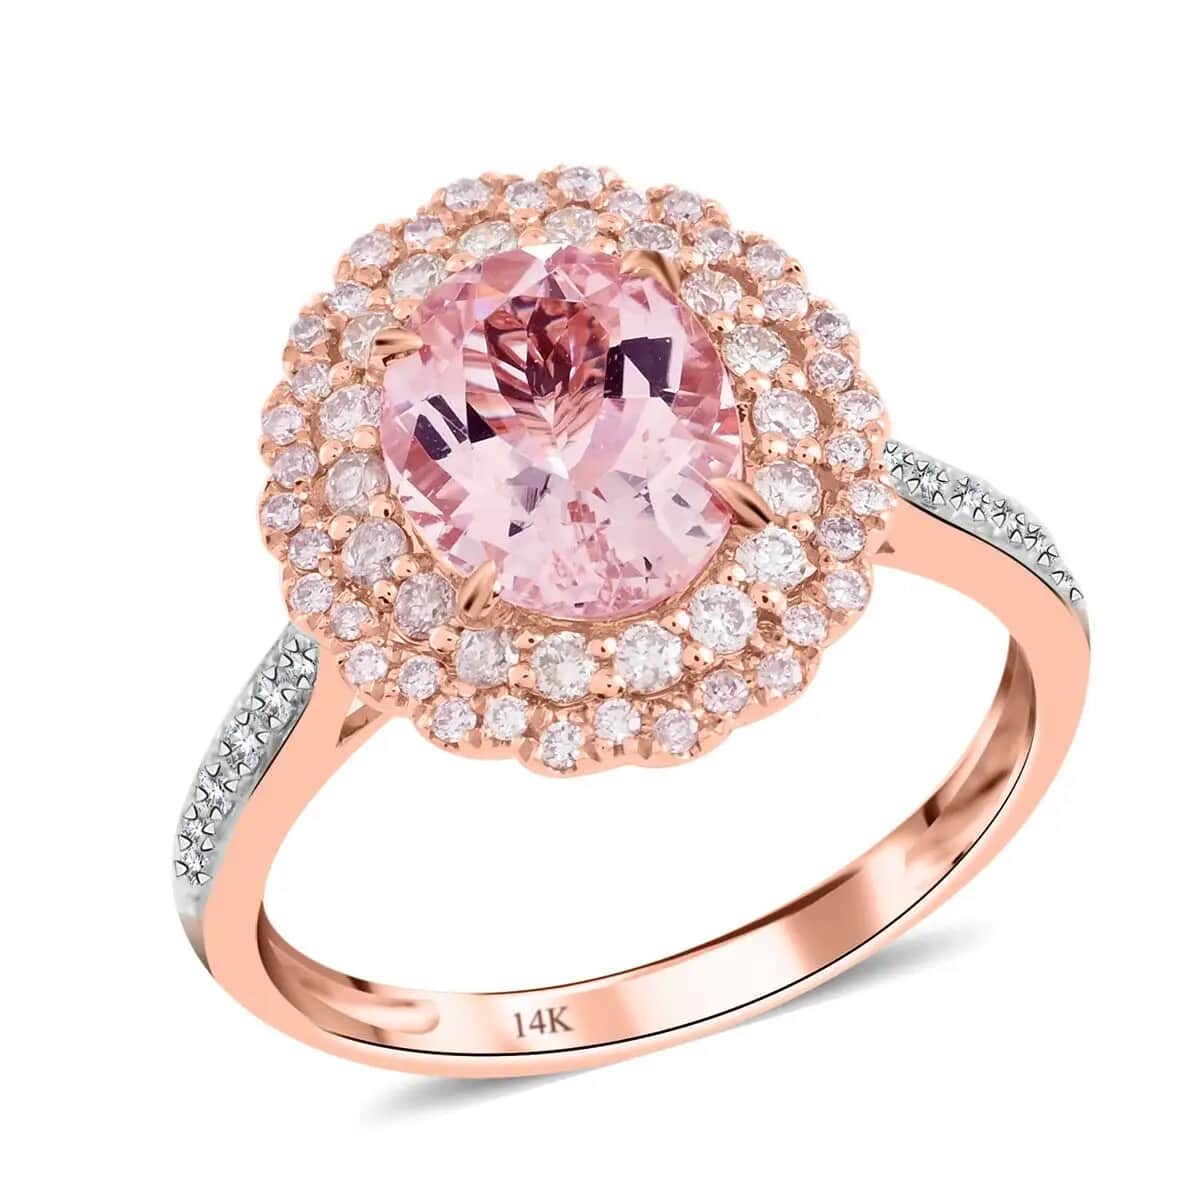 Ankur Treasure Chest Modani Marropino Morganite Ring, 14K Rose Gold Ring, Diamond Floral Halo Ring, Natural Pink And White Diamond Accent Ring 1.95 ctw (Size 8.0) image number 0